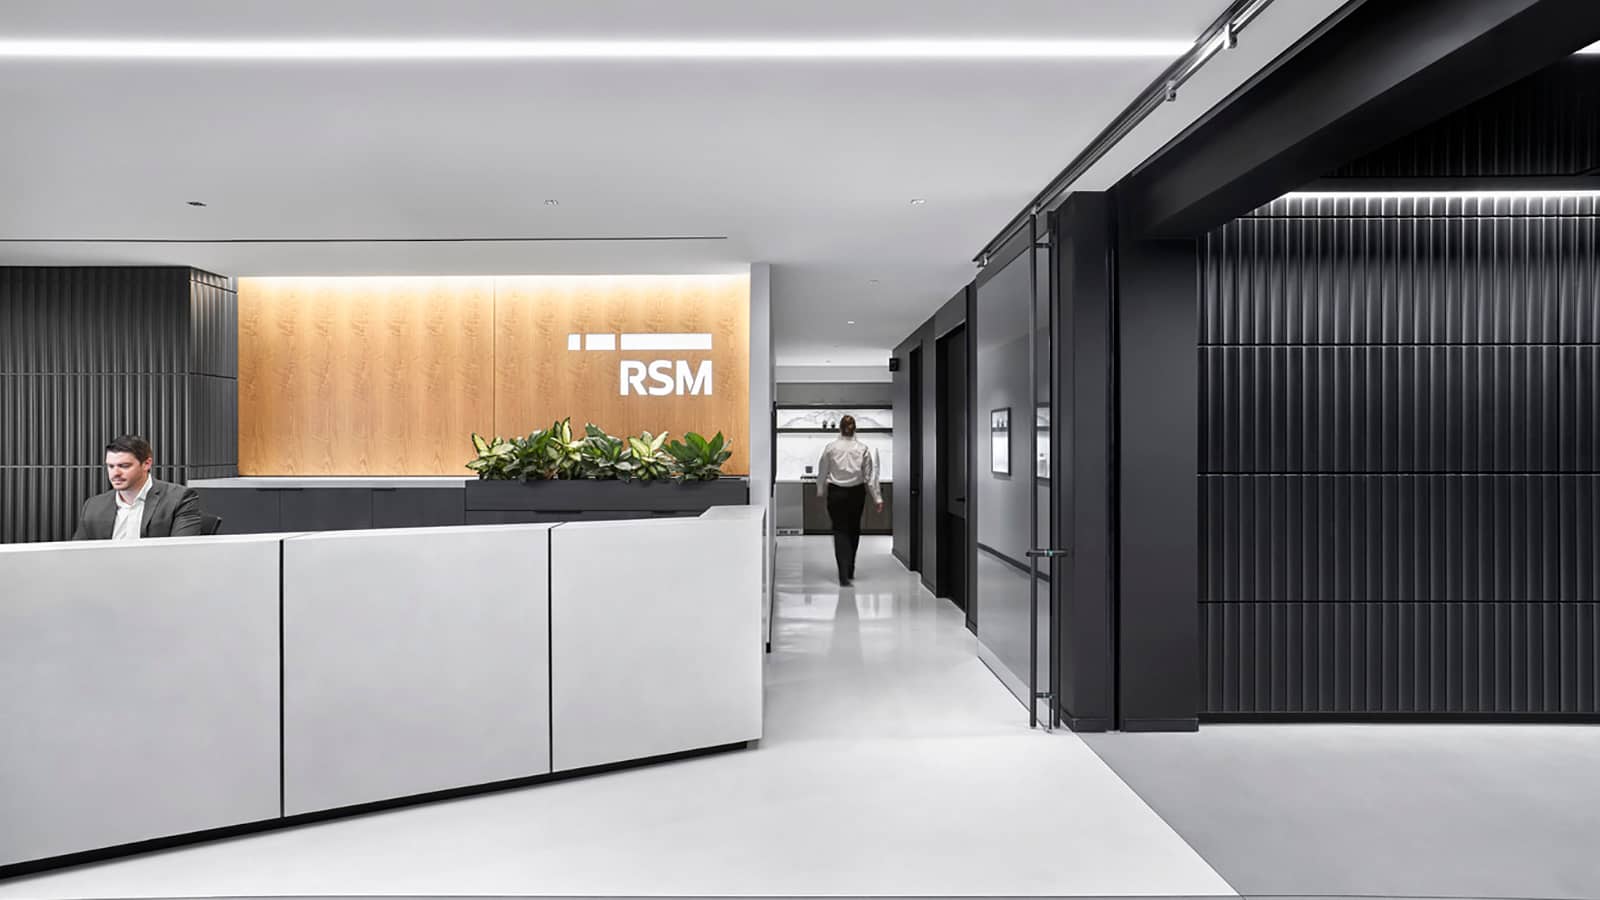 RSM Reception area and lobby